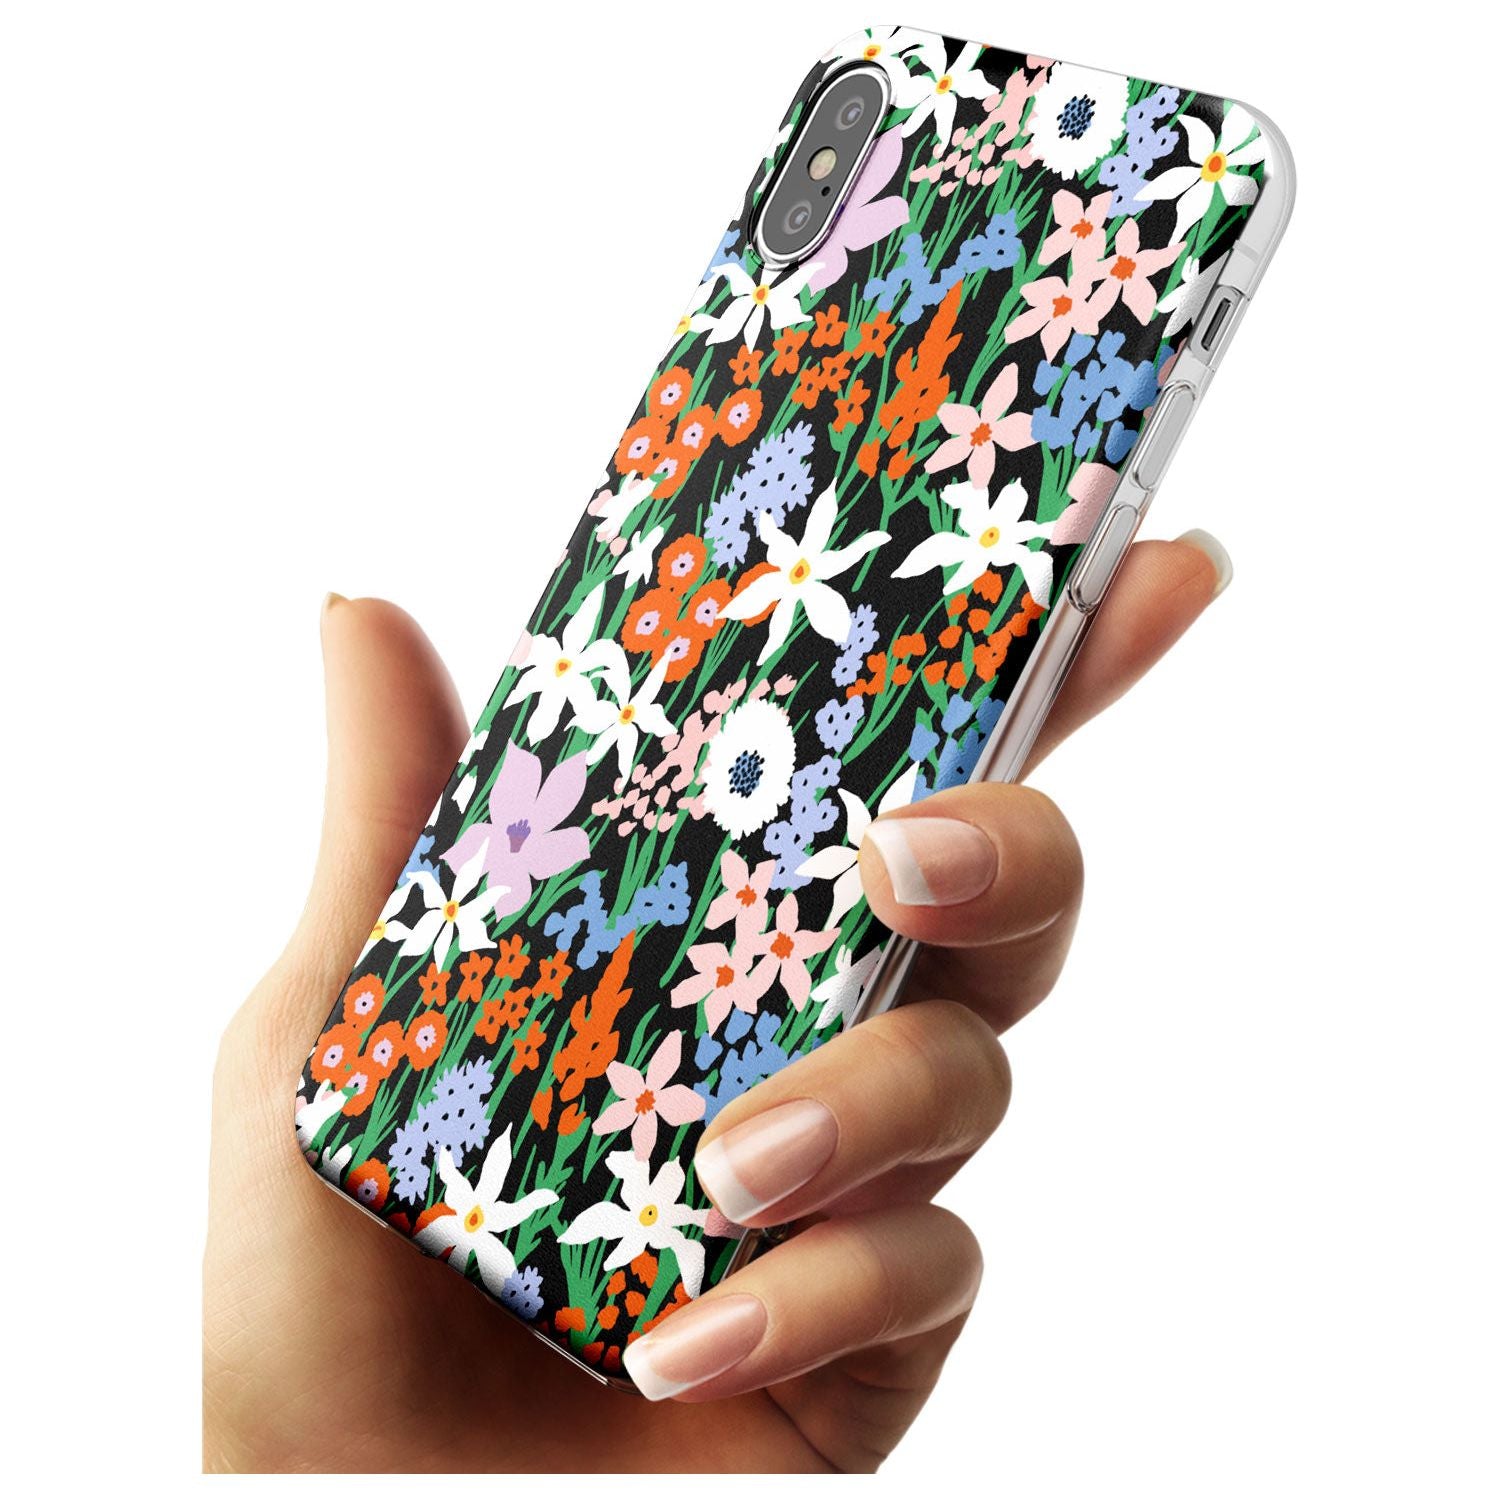 Springtime Meadow: Solid Black Impact Phone Case for iPhone X XS Max XR